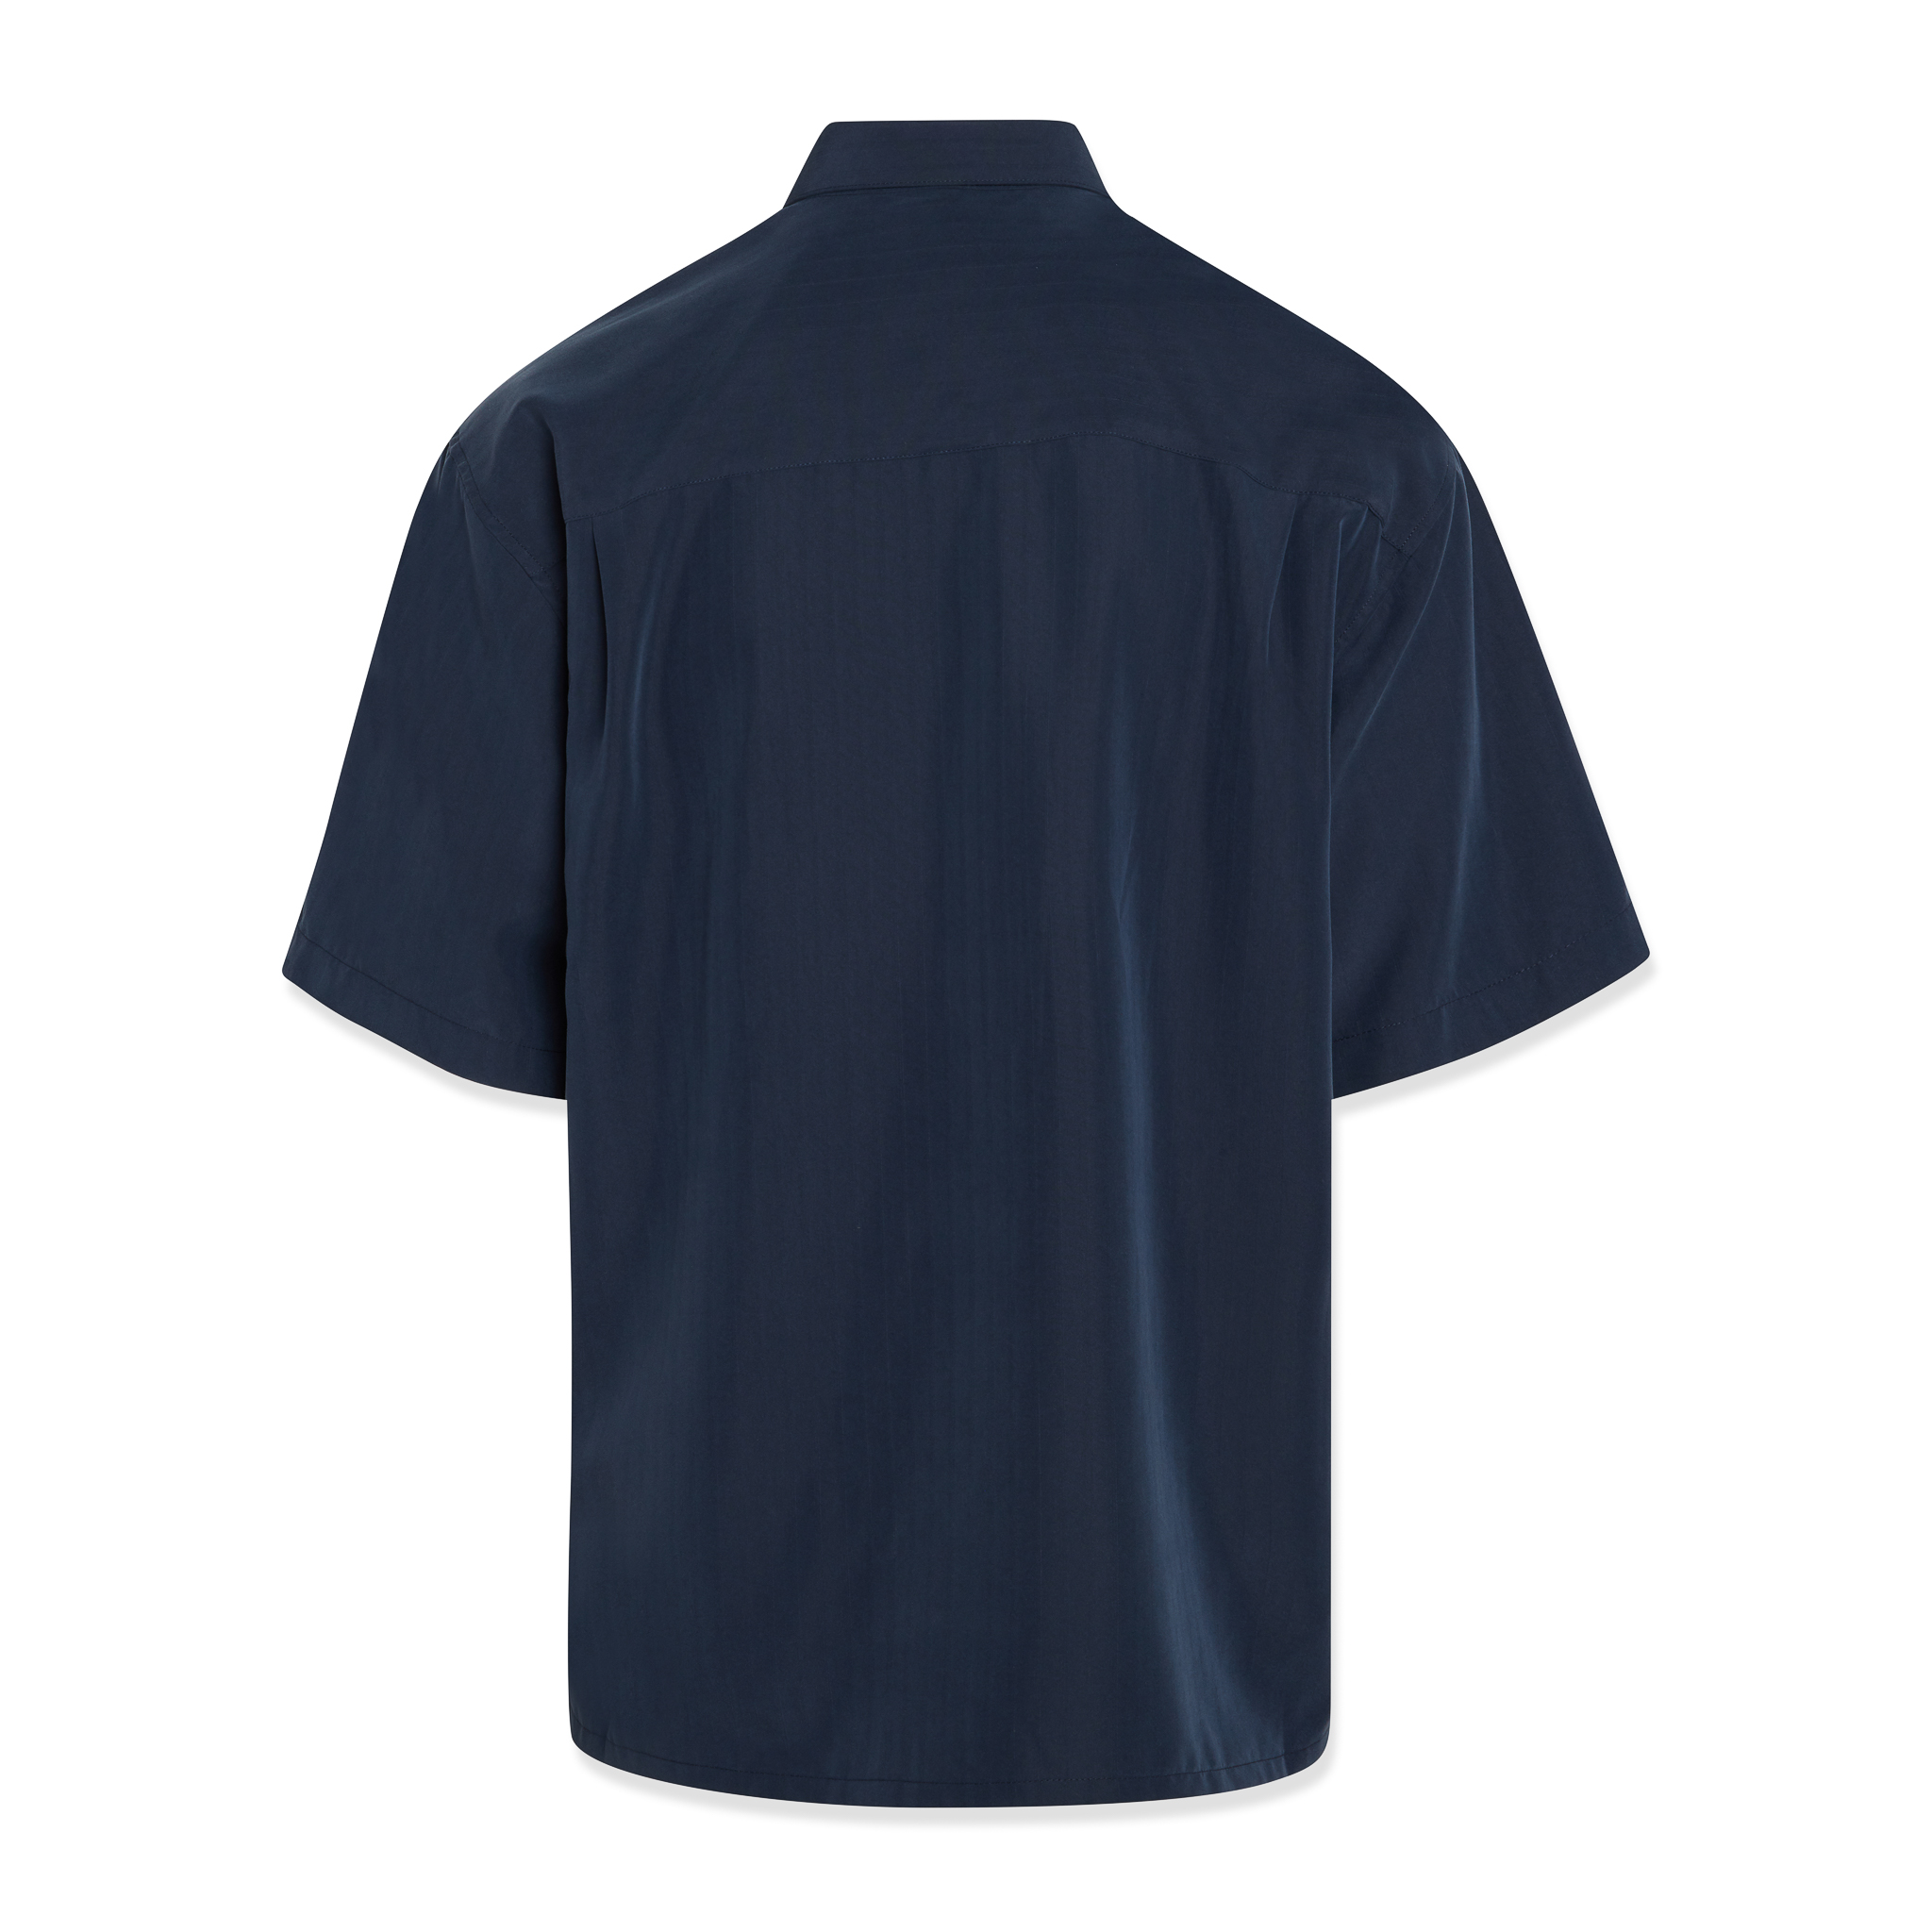 bamboo cay panelled pacific palms bowling shirt